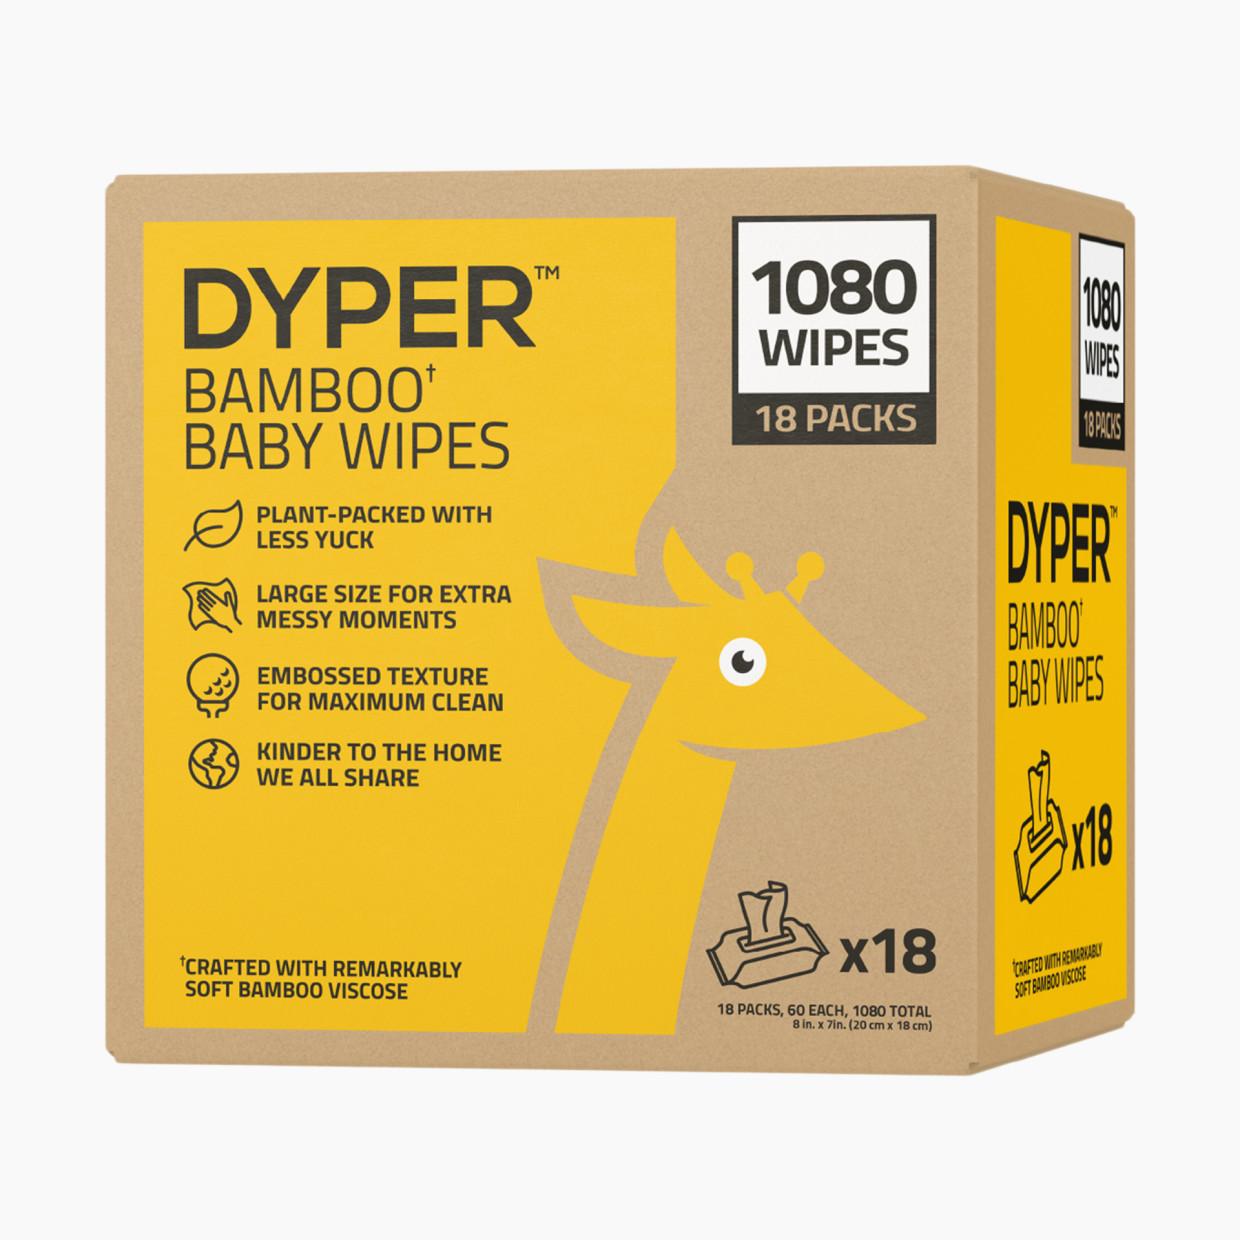 DYPER Bamboo Viscose Baby Wipes - 1080.